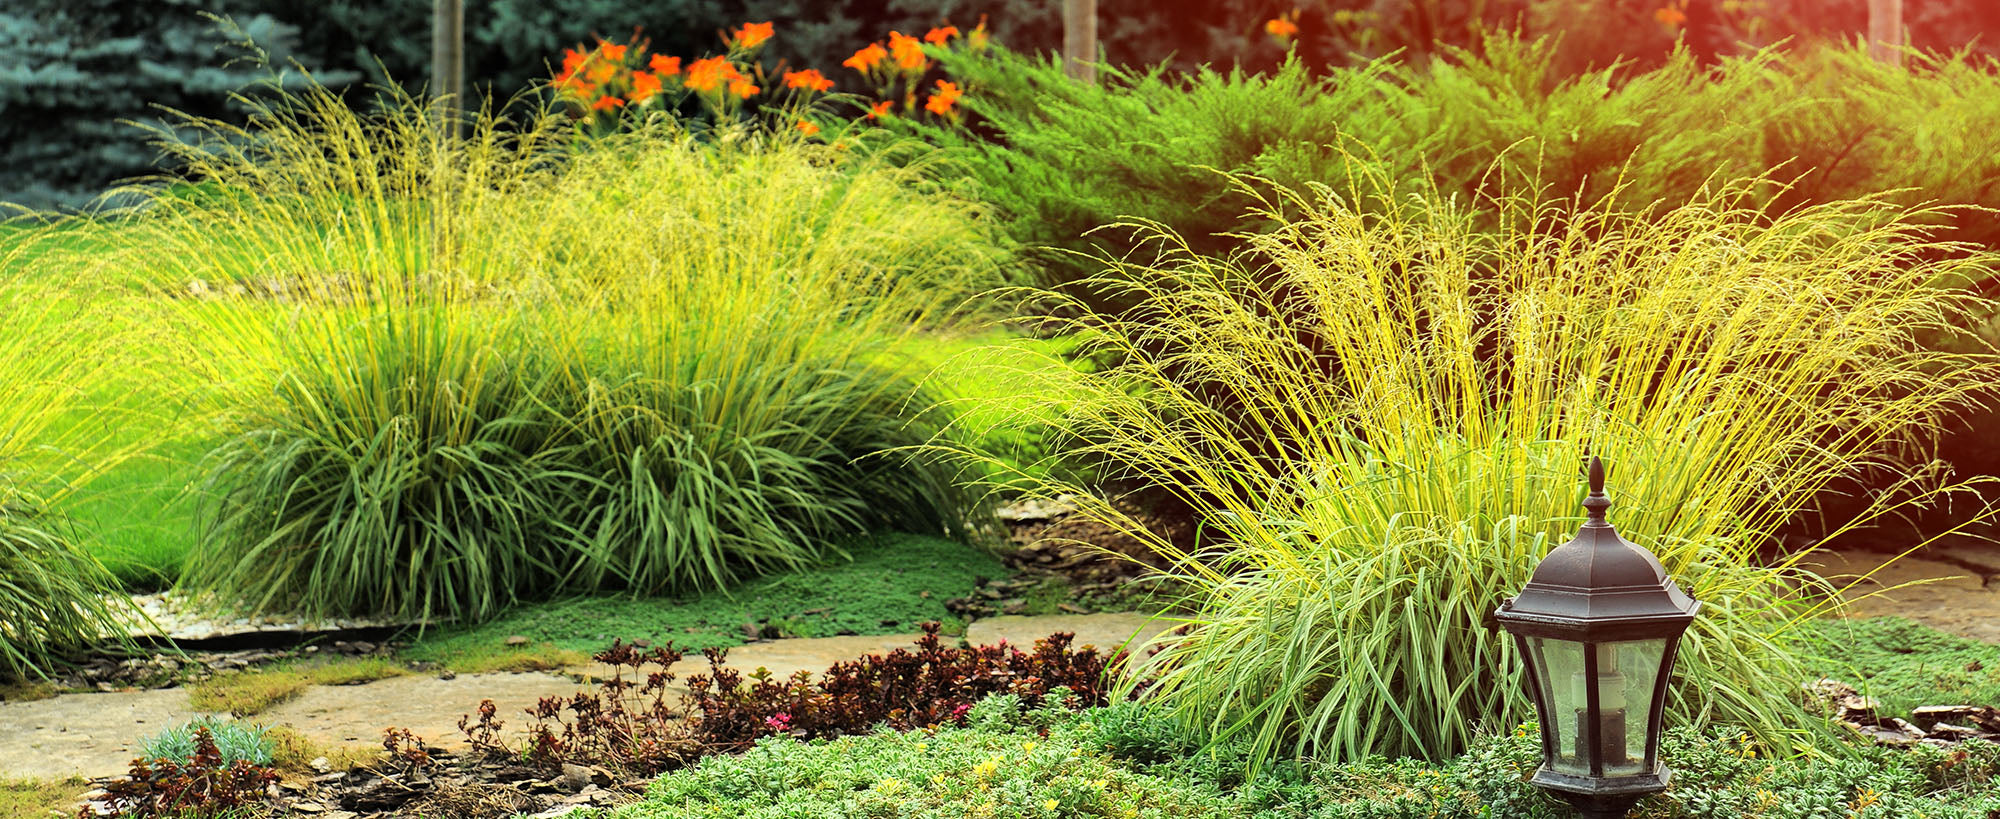 10 Tips for a Beautiful Lawn: A Guide to Lawn Care and Maintenance